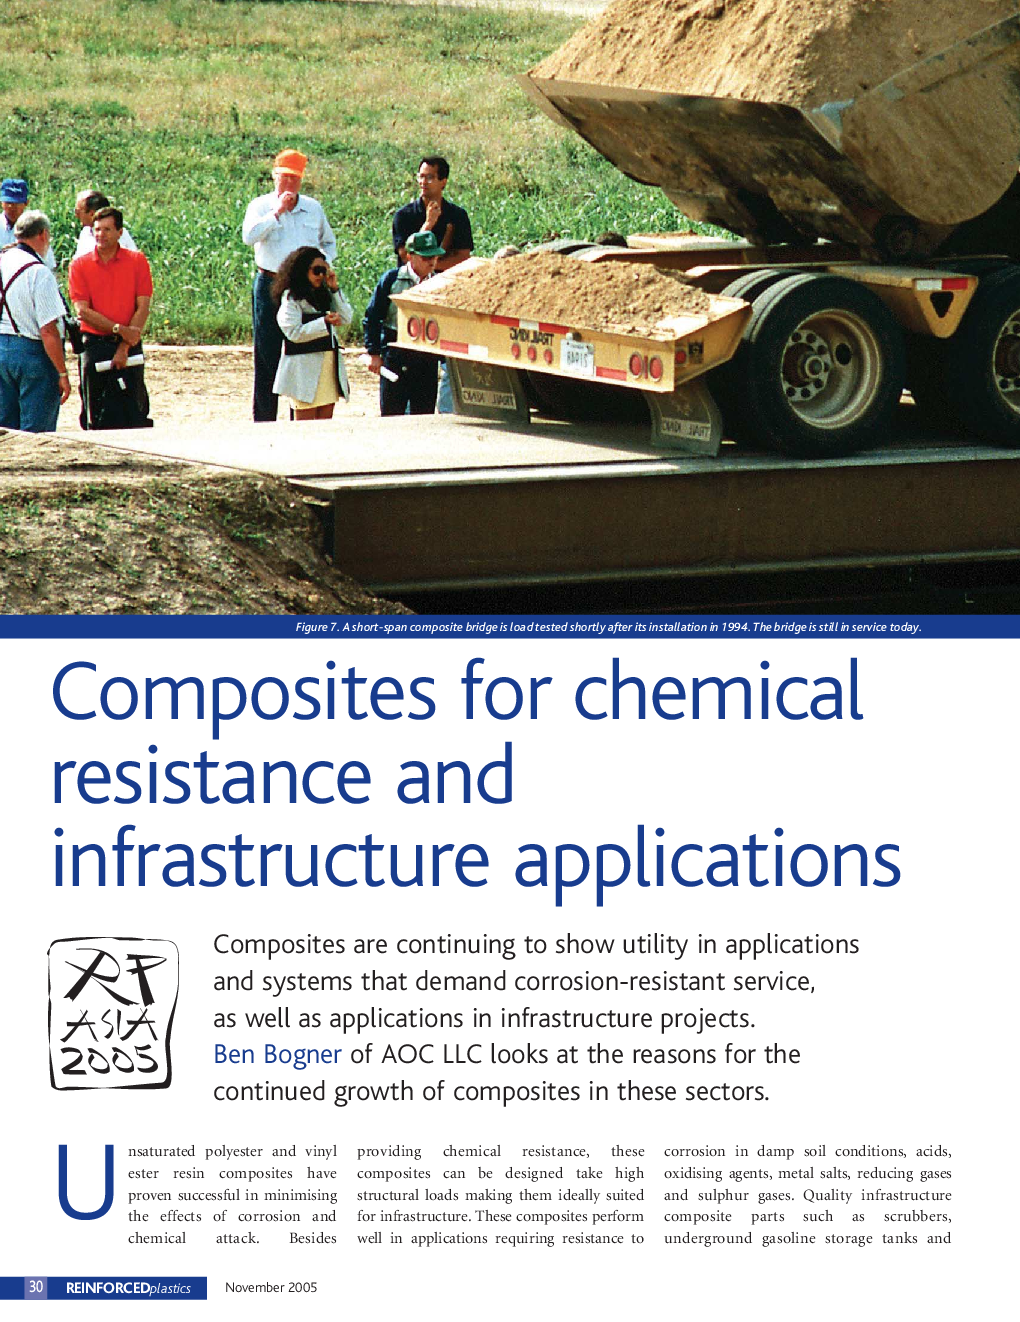 Composites for chemical resistance and infrastructure applications